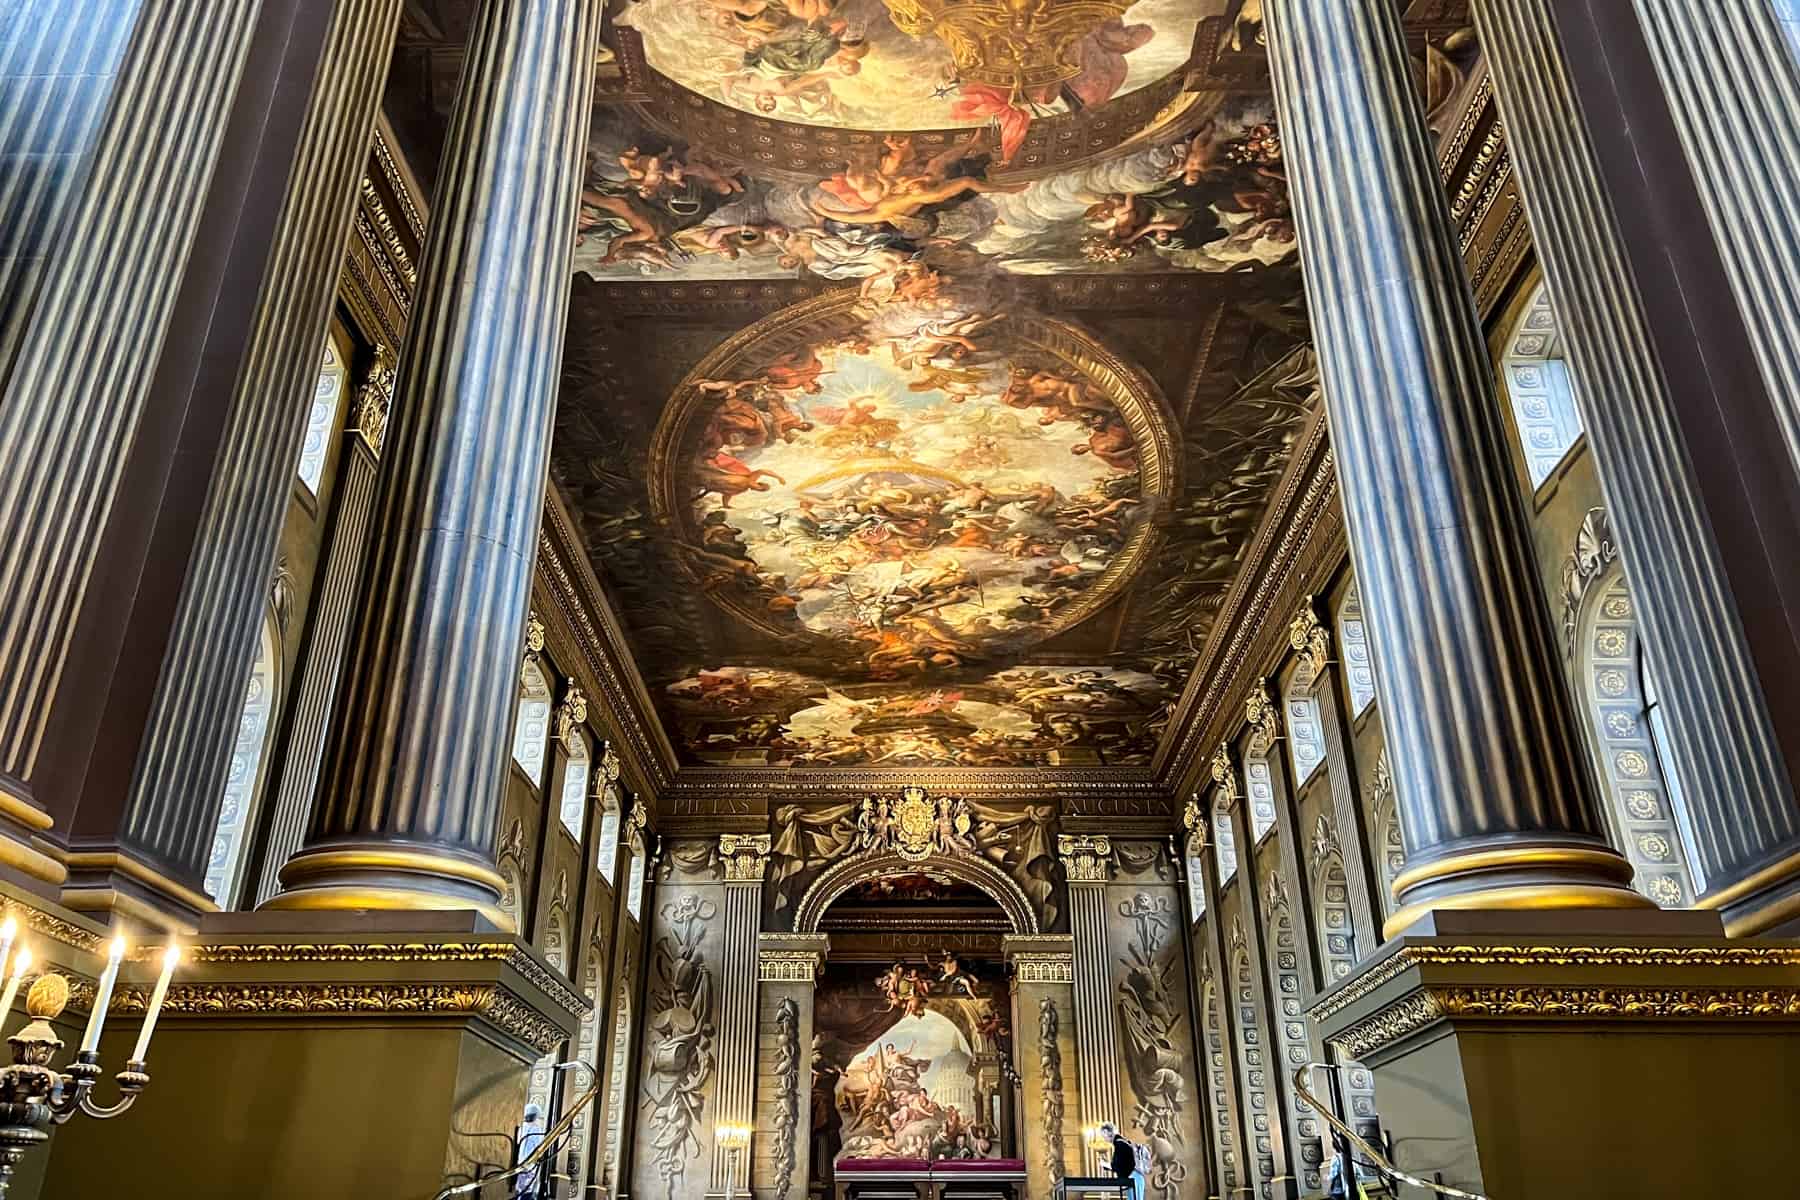 View from the columned entrance of the magnificent murals and luminous painted ceiling in the Painted Hall in Greenwich. 